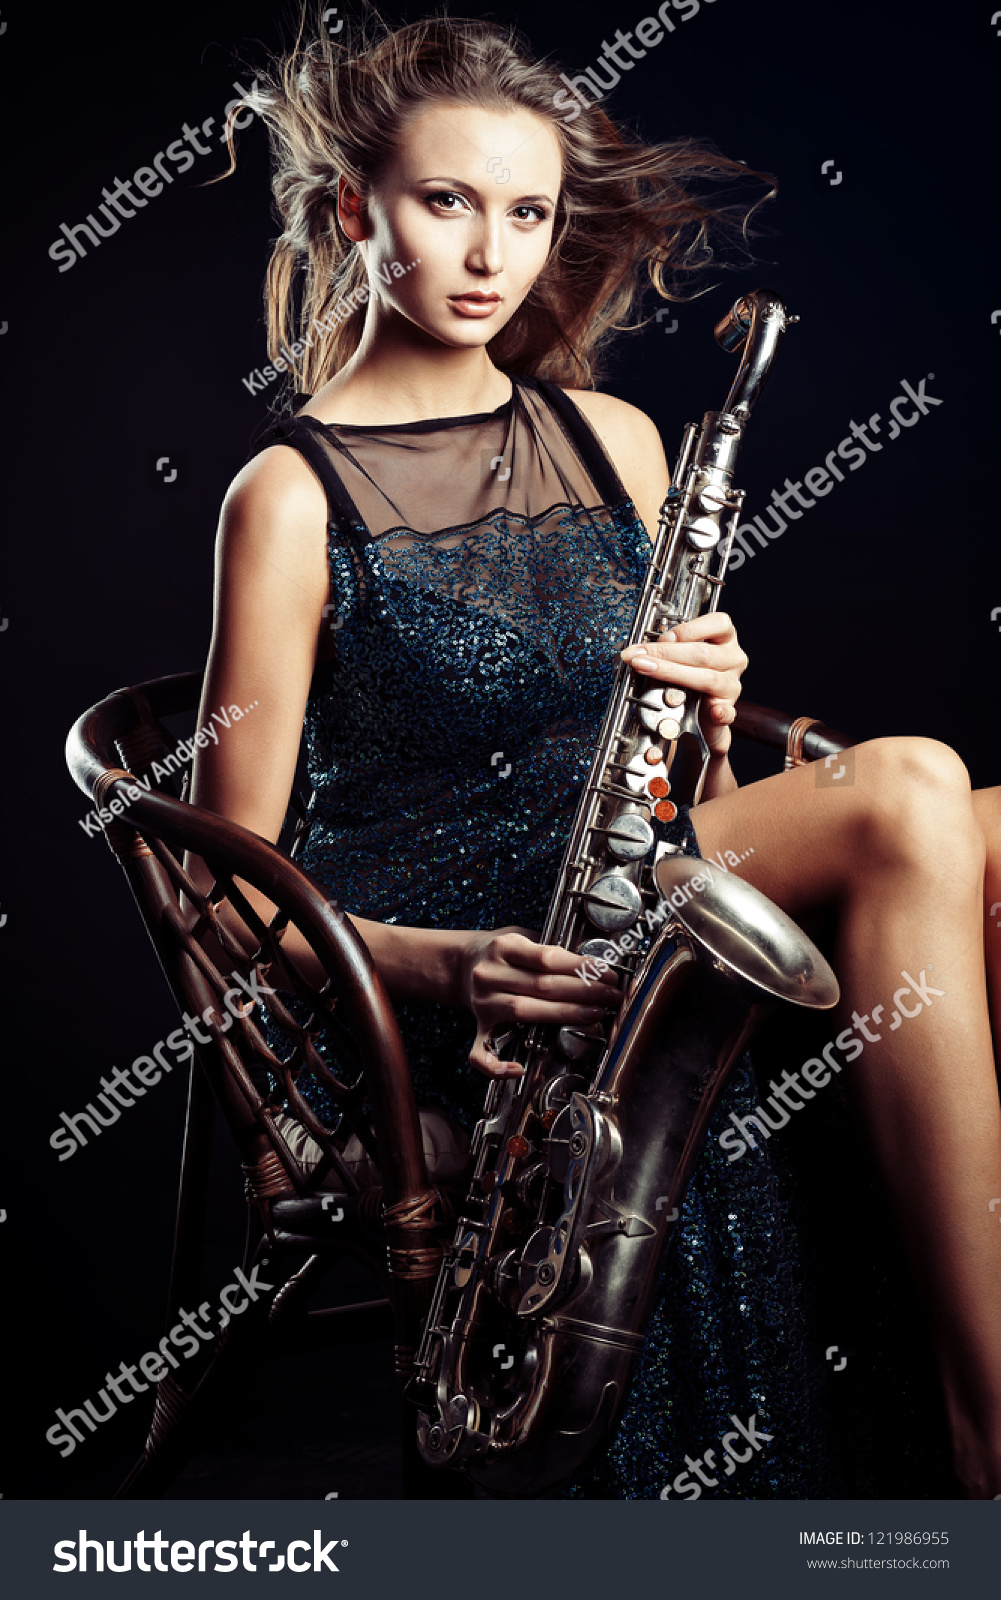 Portrait Of A Sexual Young Woman Posing With Saxophone At 